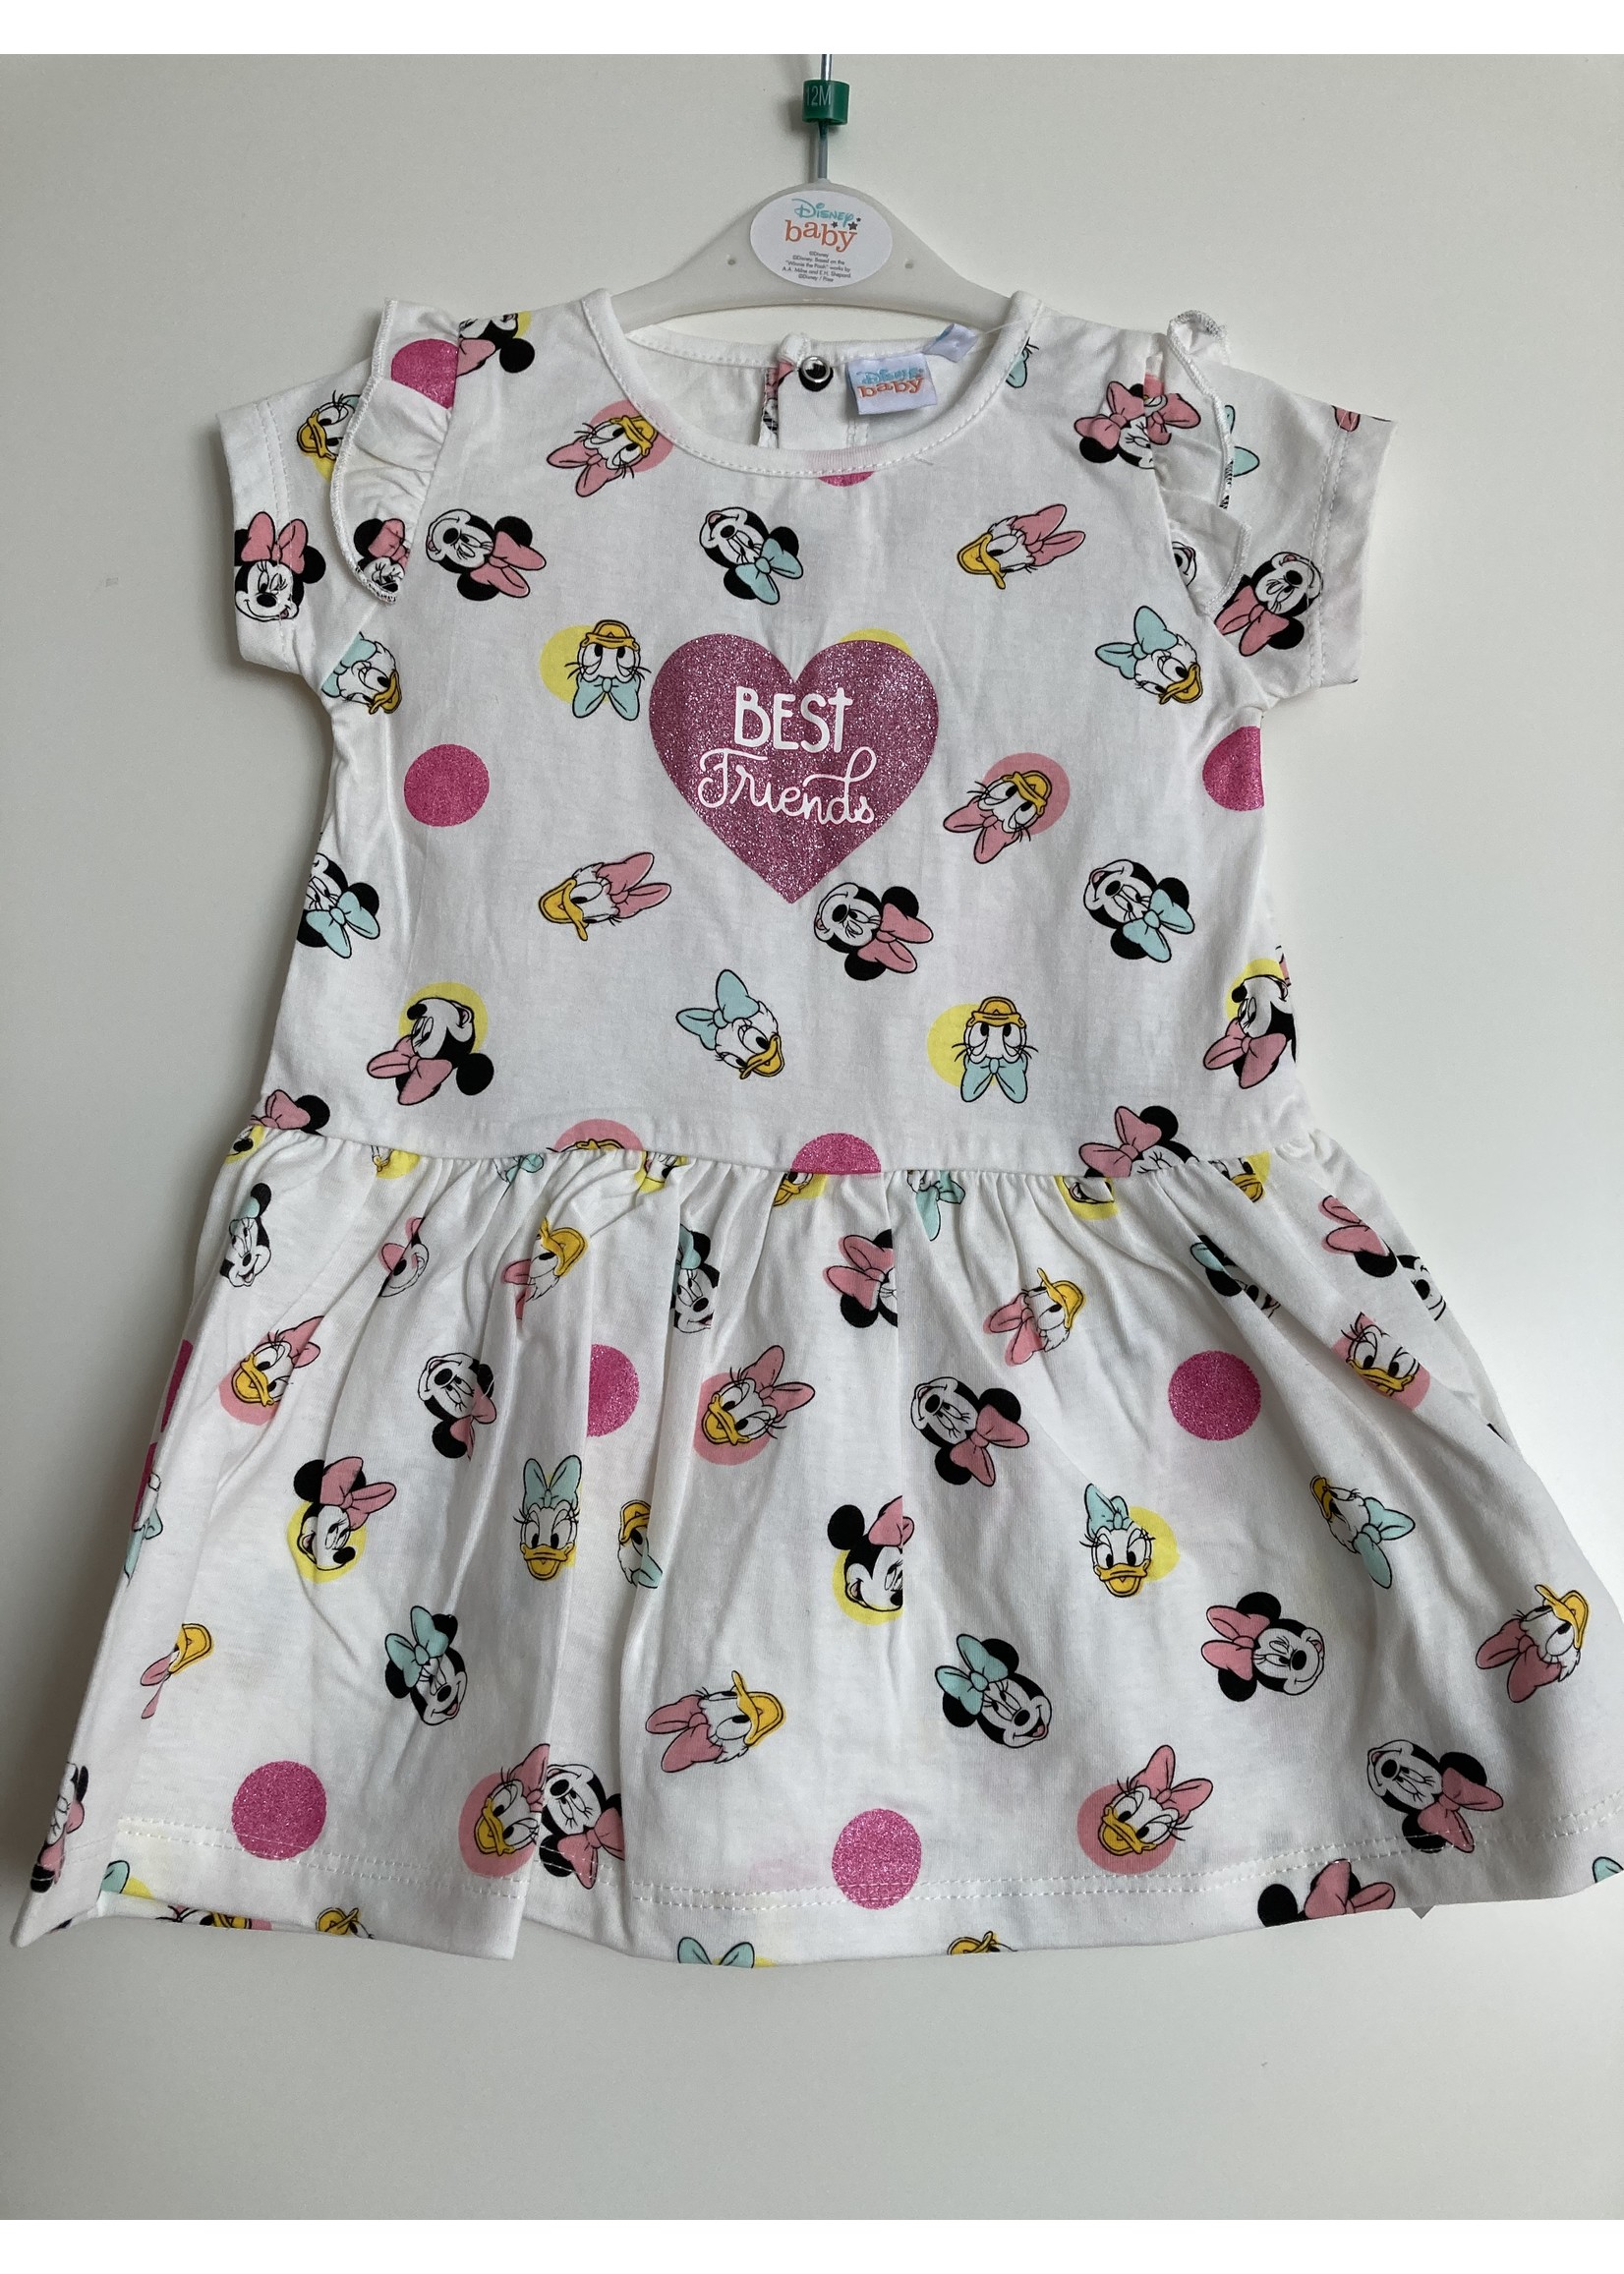 Disney baby Minnie Mouse dress from Disney baby white